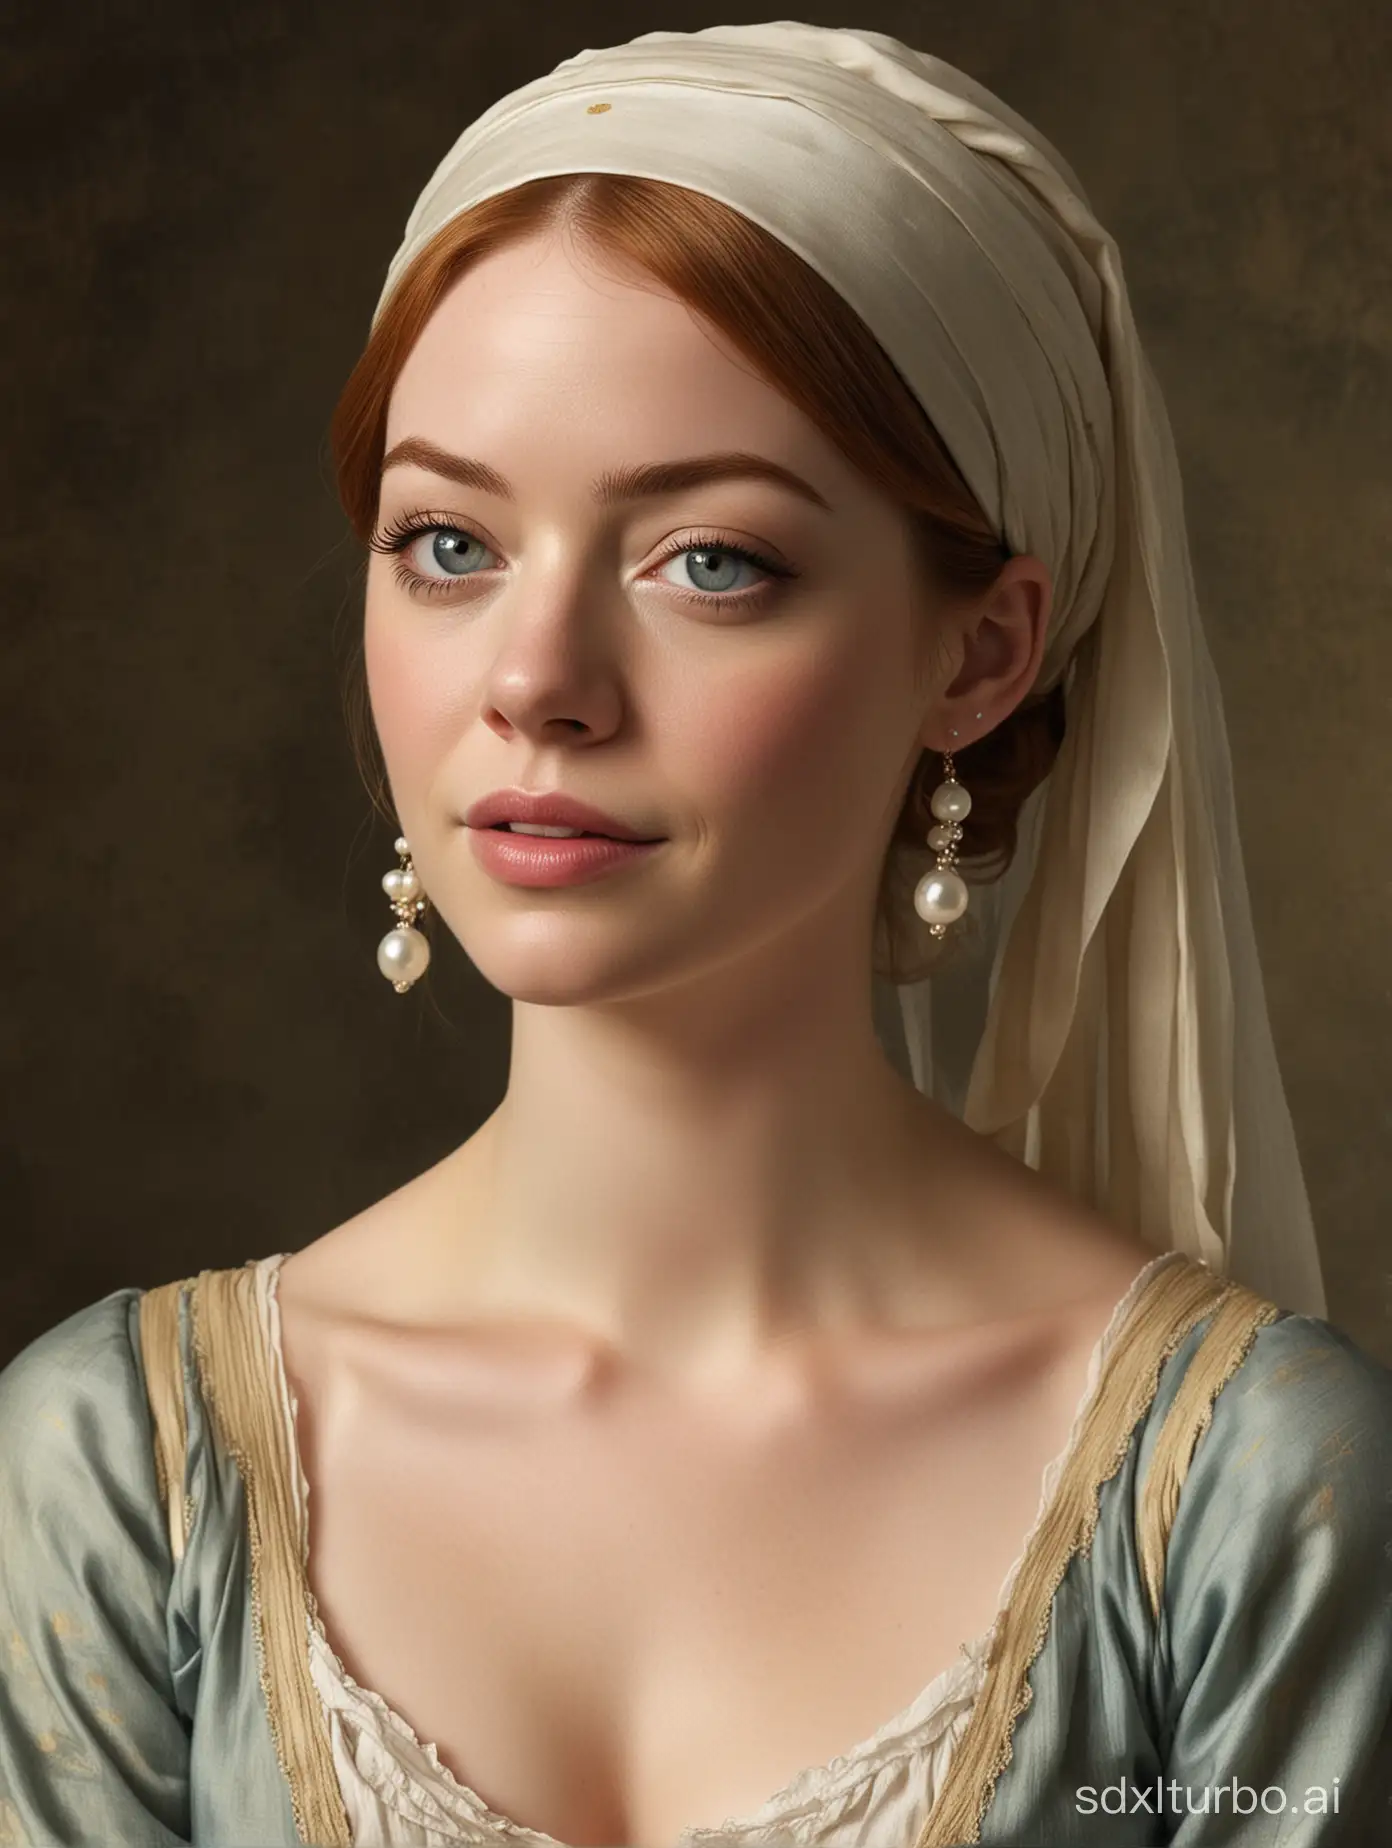 Emma-Stone-Reimagines-Maiden-with-a-Pearl-Earring-in-a-Dynamic-Full-Body-Interpretation